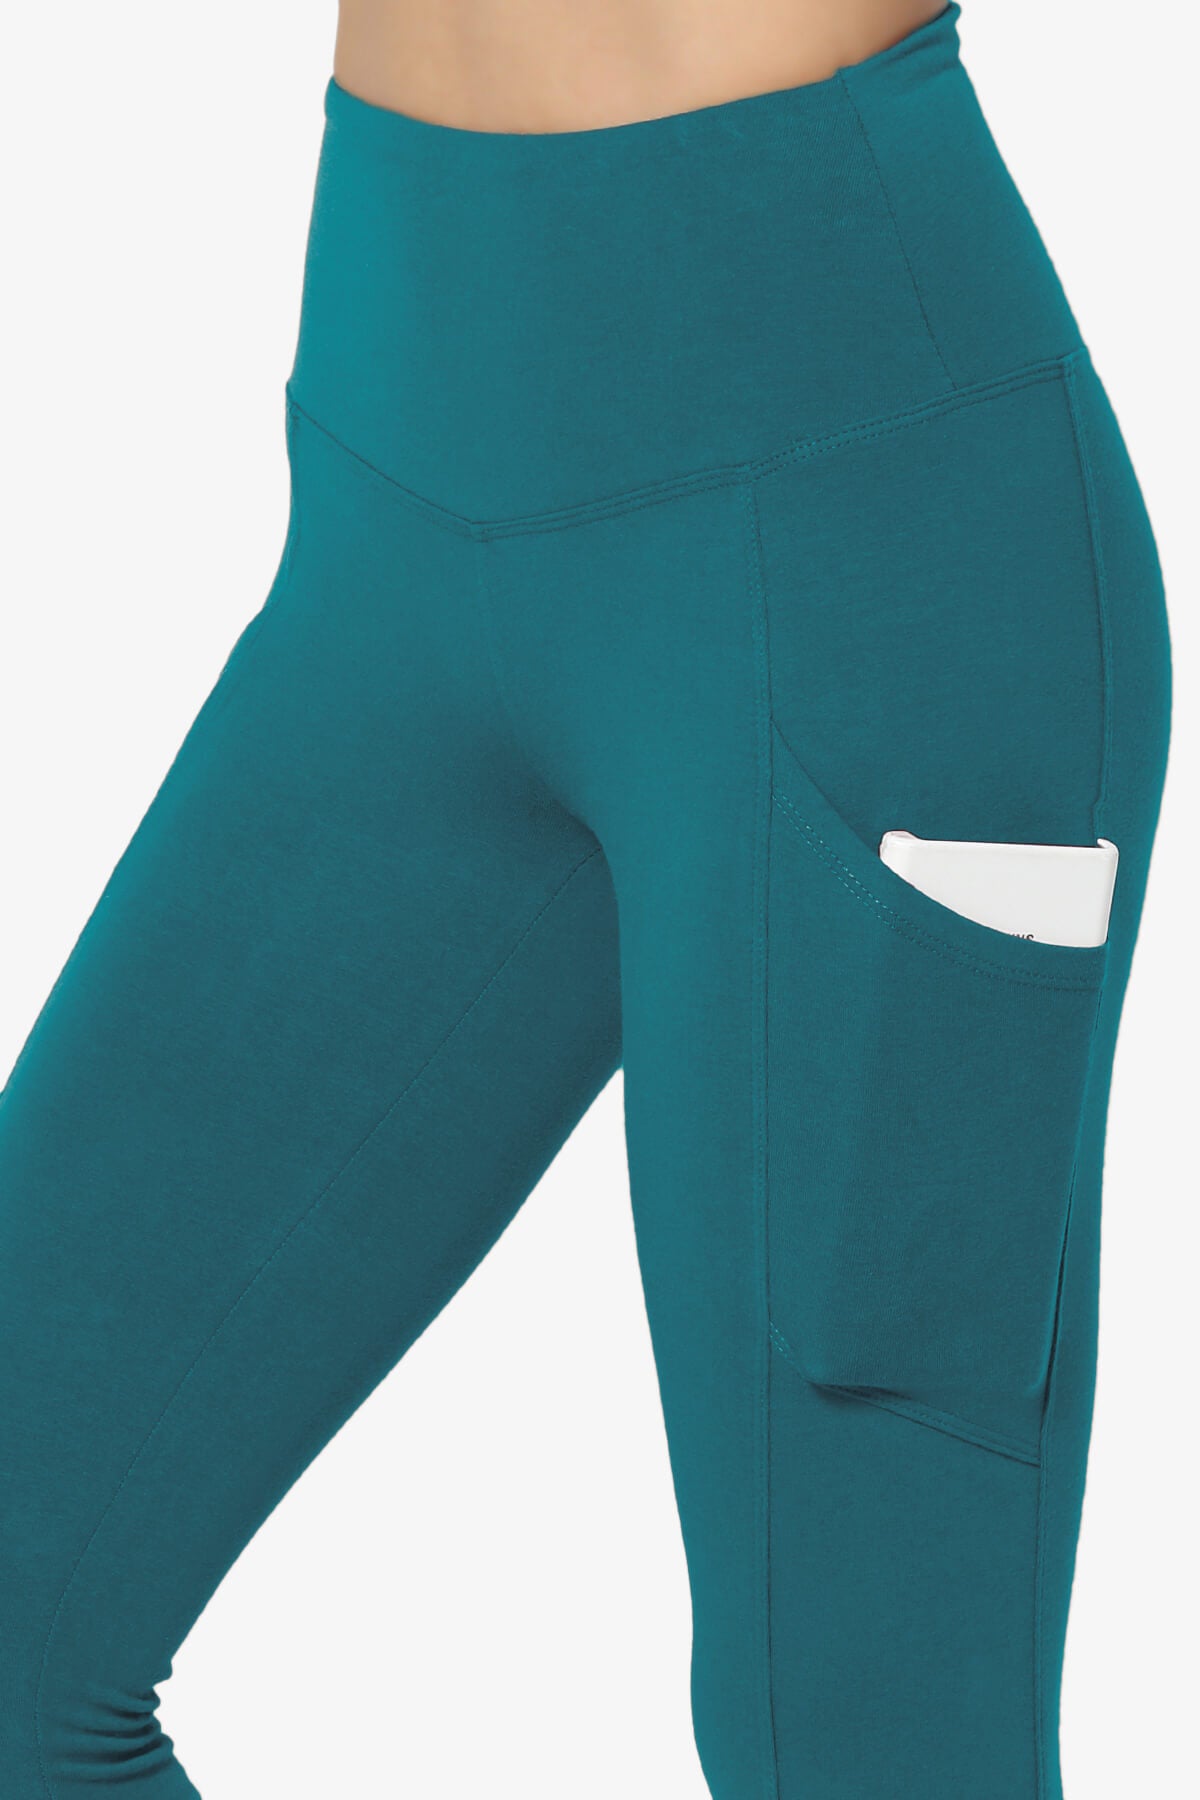 Ansley Luxe Cotton Leggings with Pockets TEAL_5